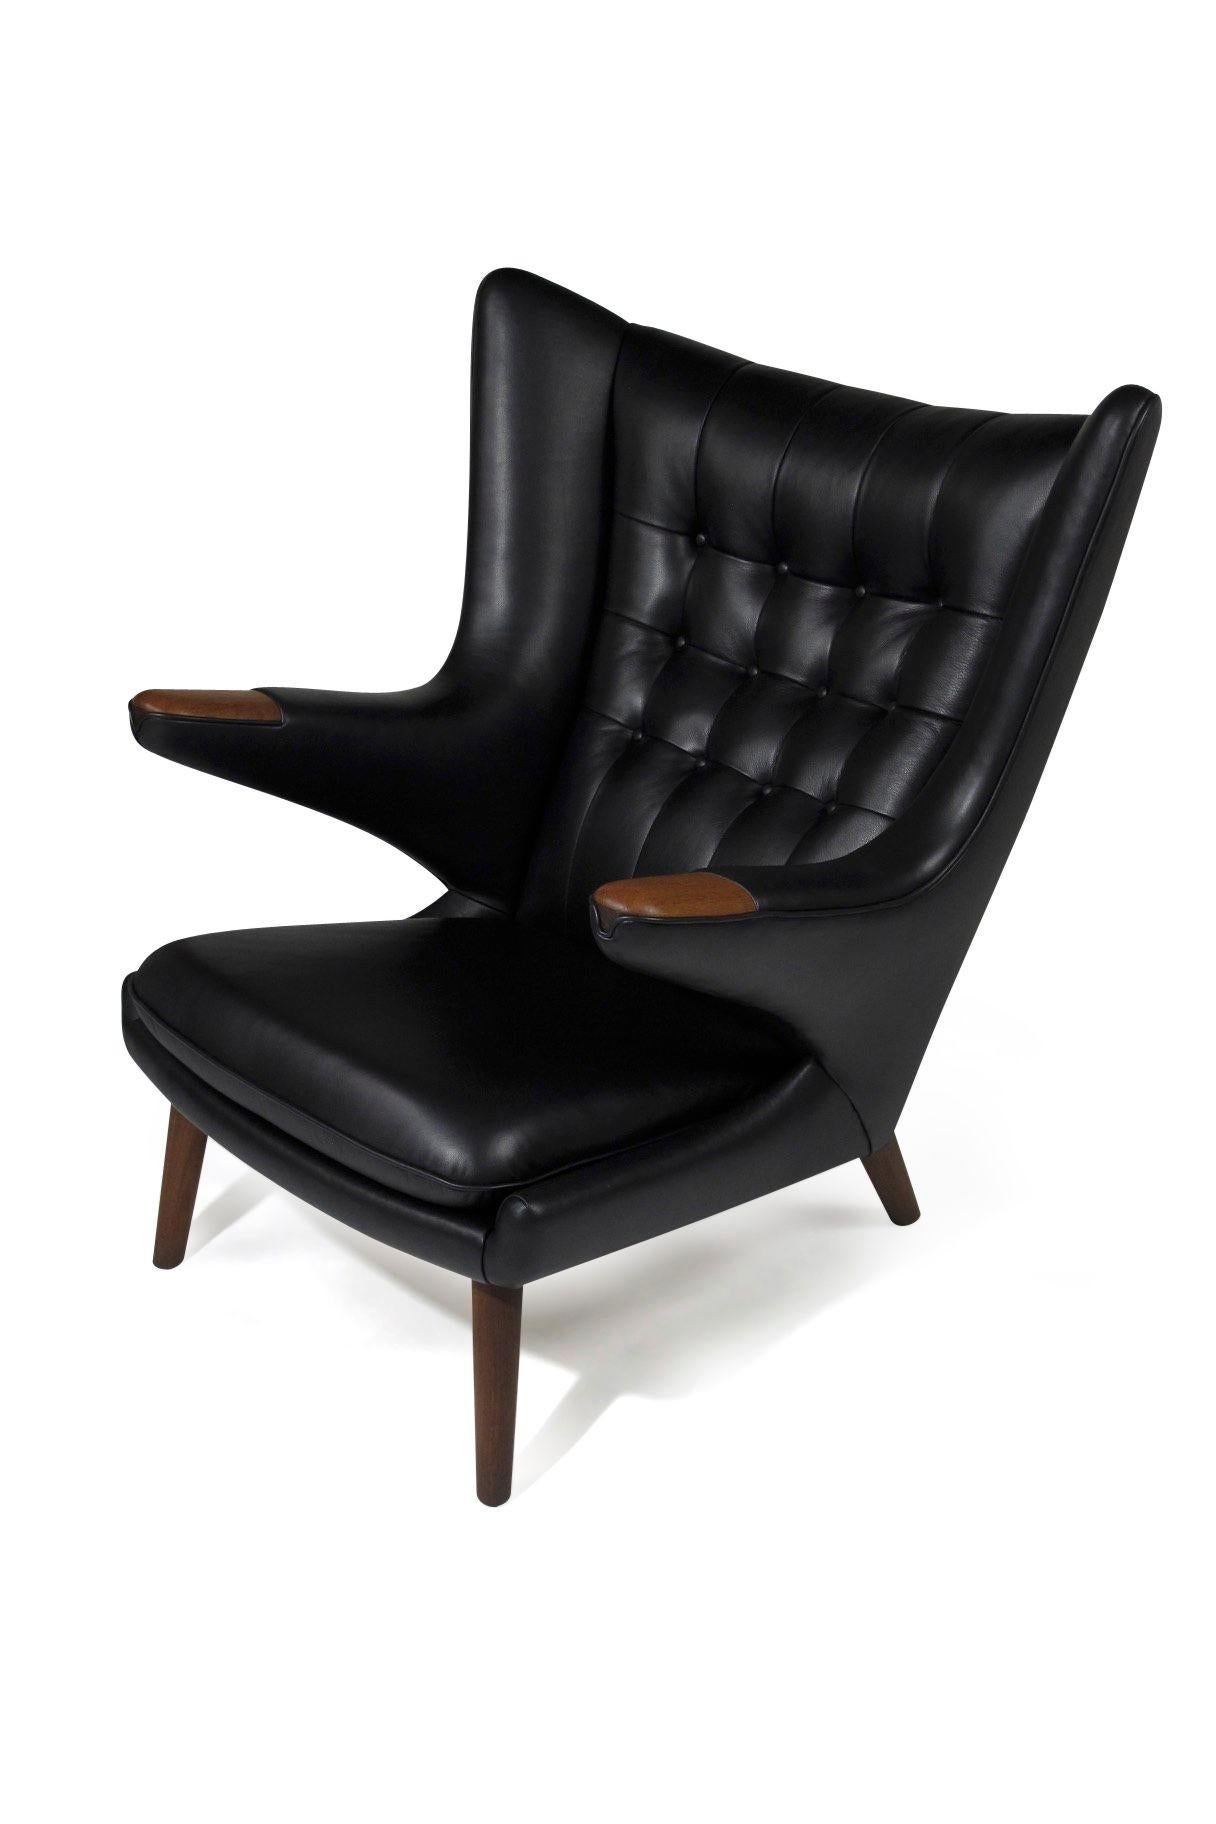 Hans J. Wegner Papa Bear Chair AP 19 & Ottoman AP 29 in Leather In Excellent Condition For Sale In Oakland, CA